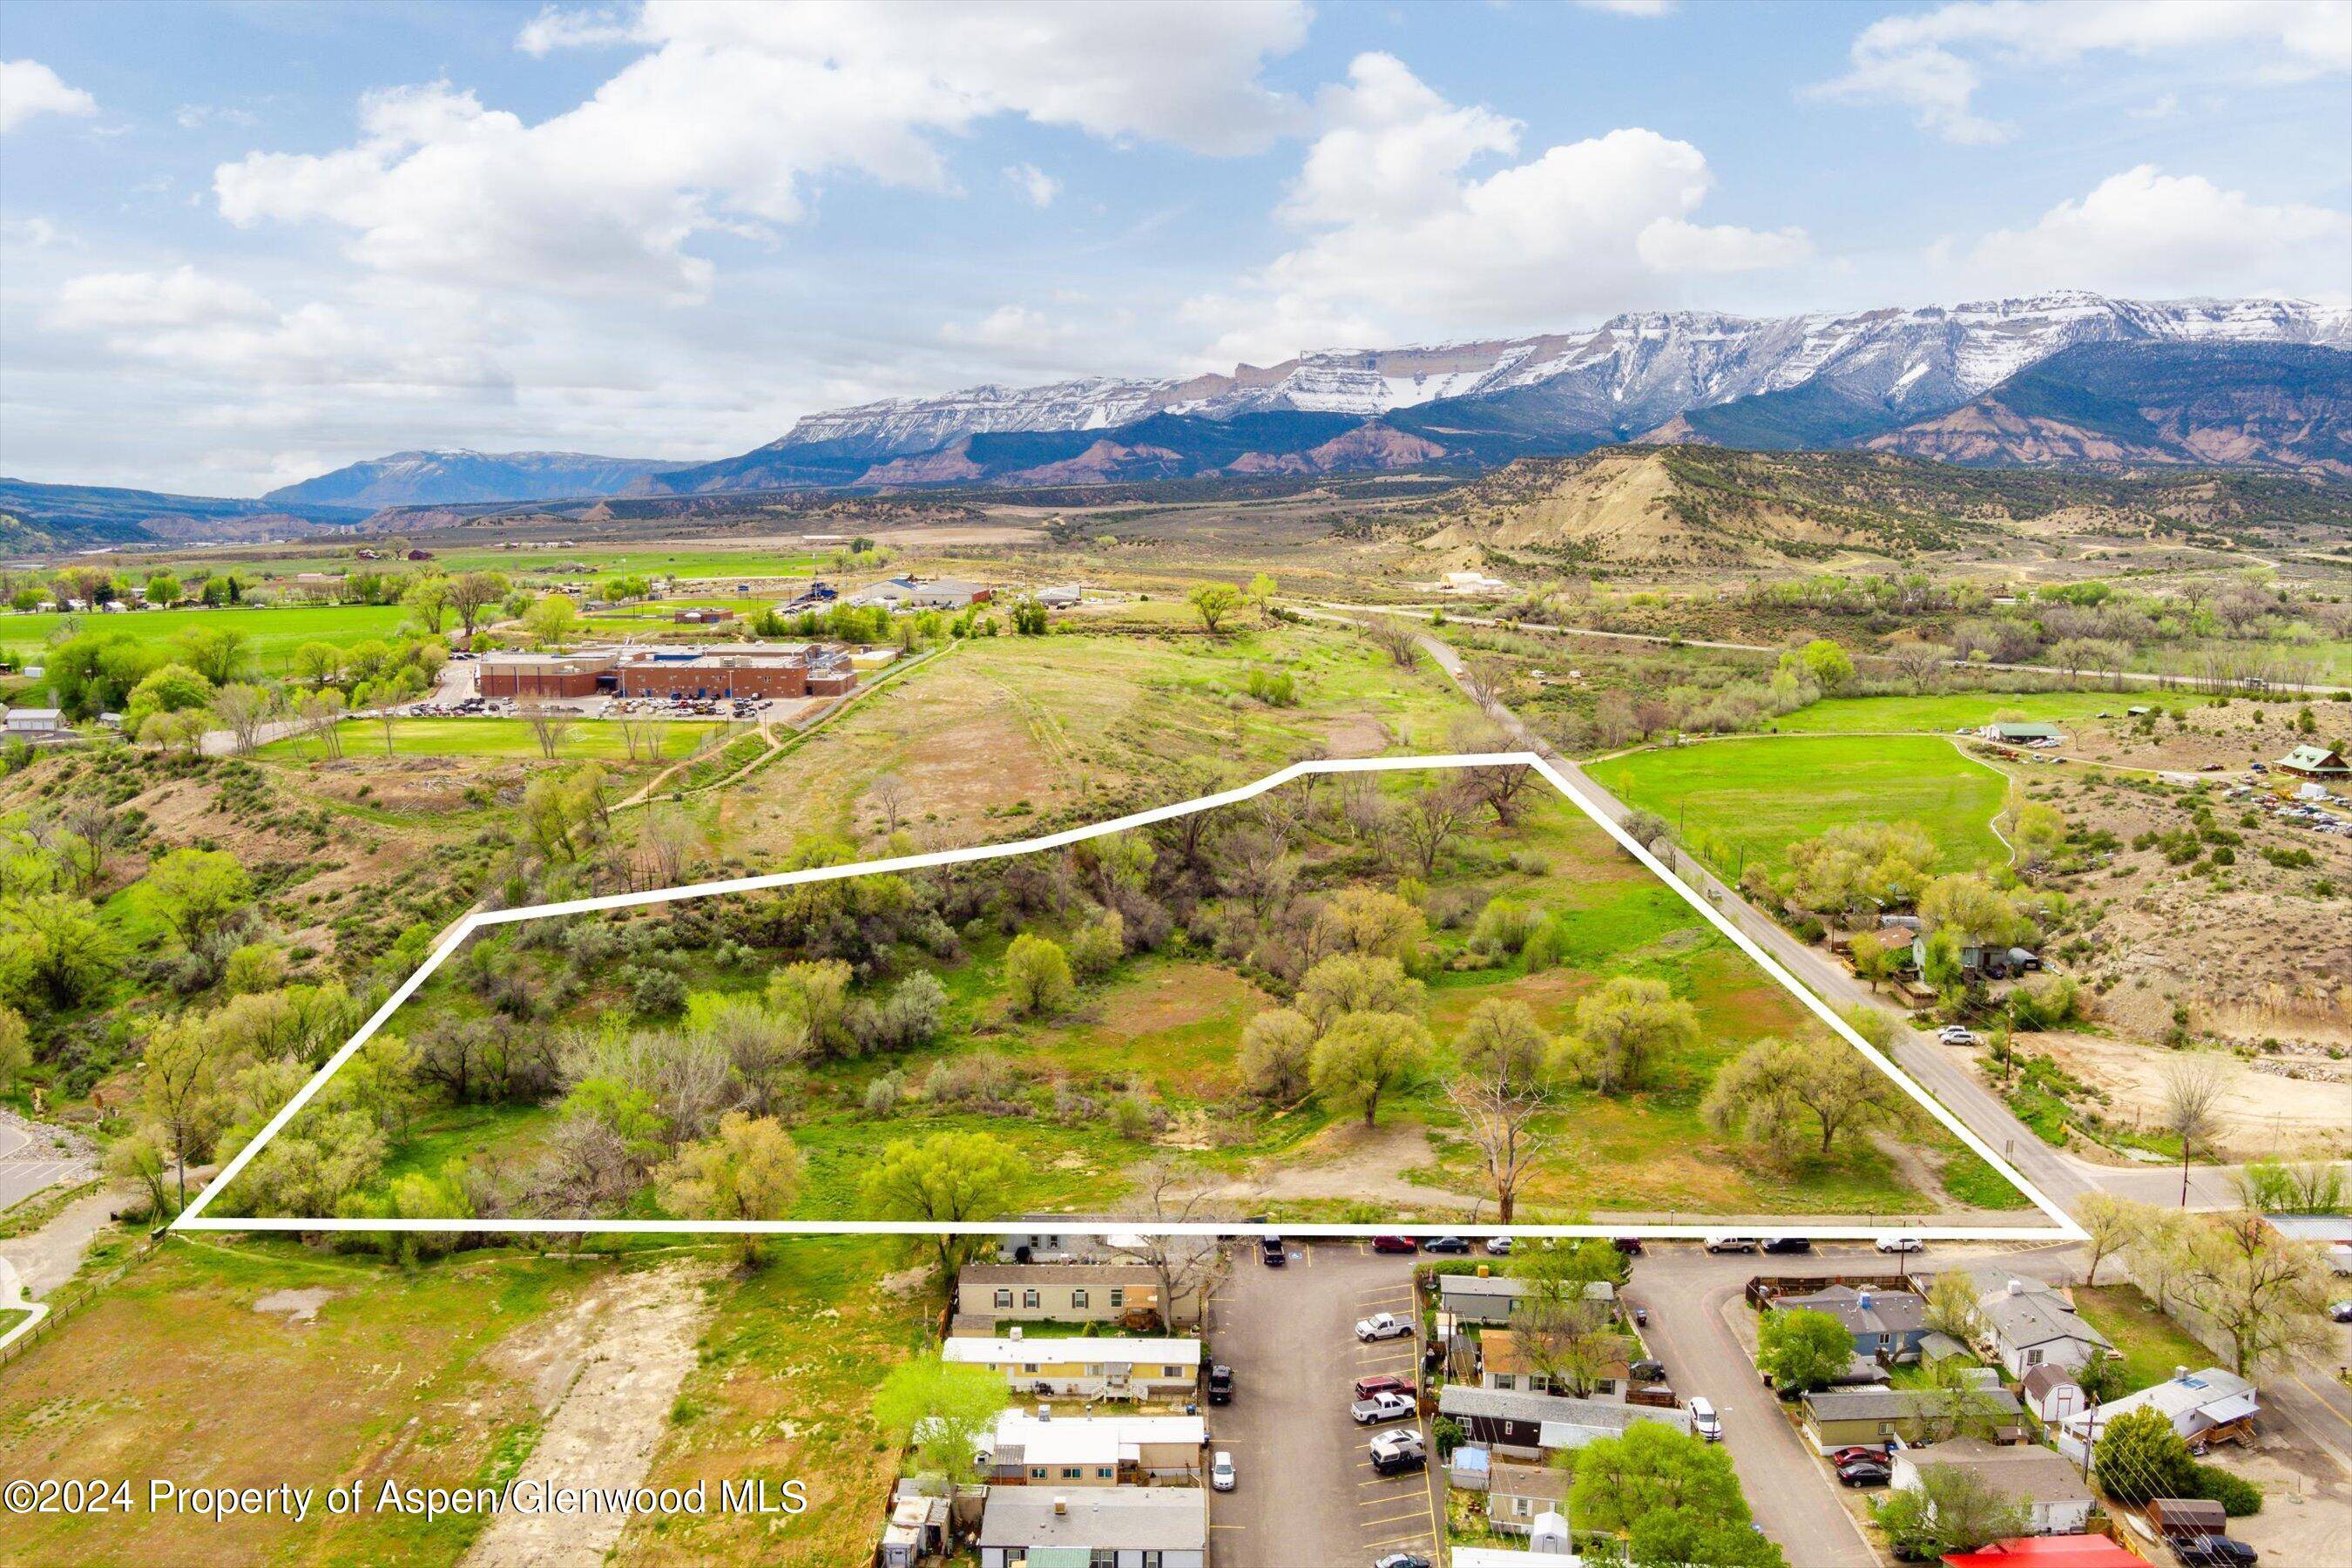 Exciting Development Potential Over 9 Acres in Rifle Welcome to a rare opportunity to own over 9 acres of prime land with endless development potential !